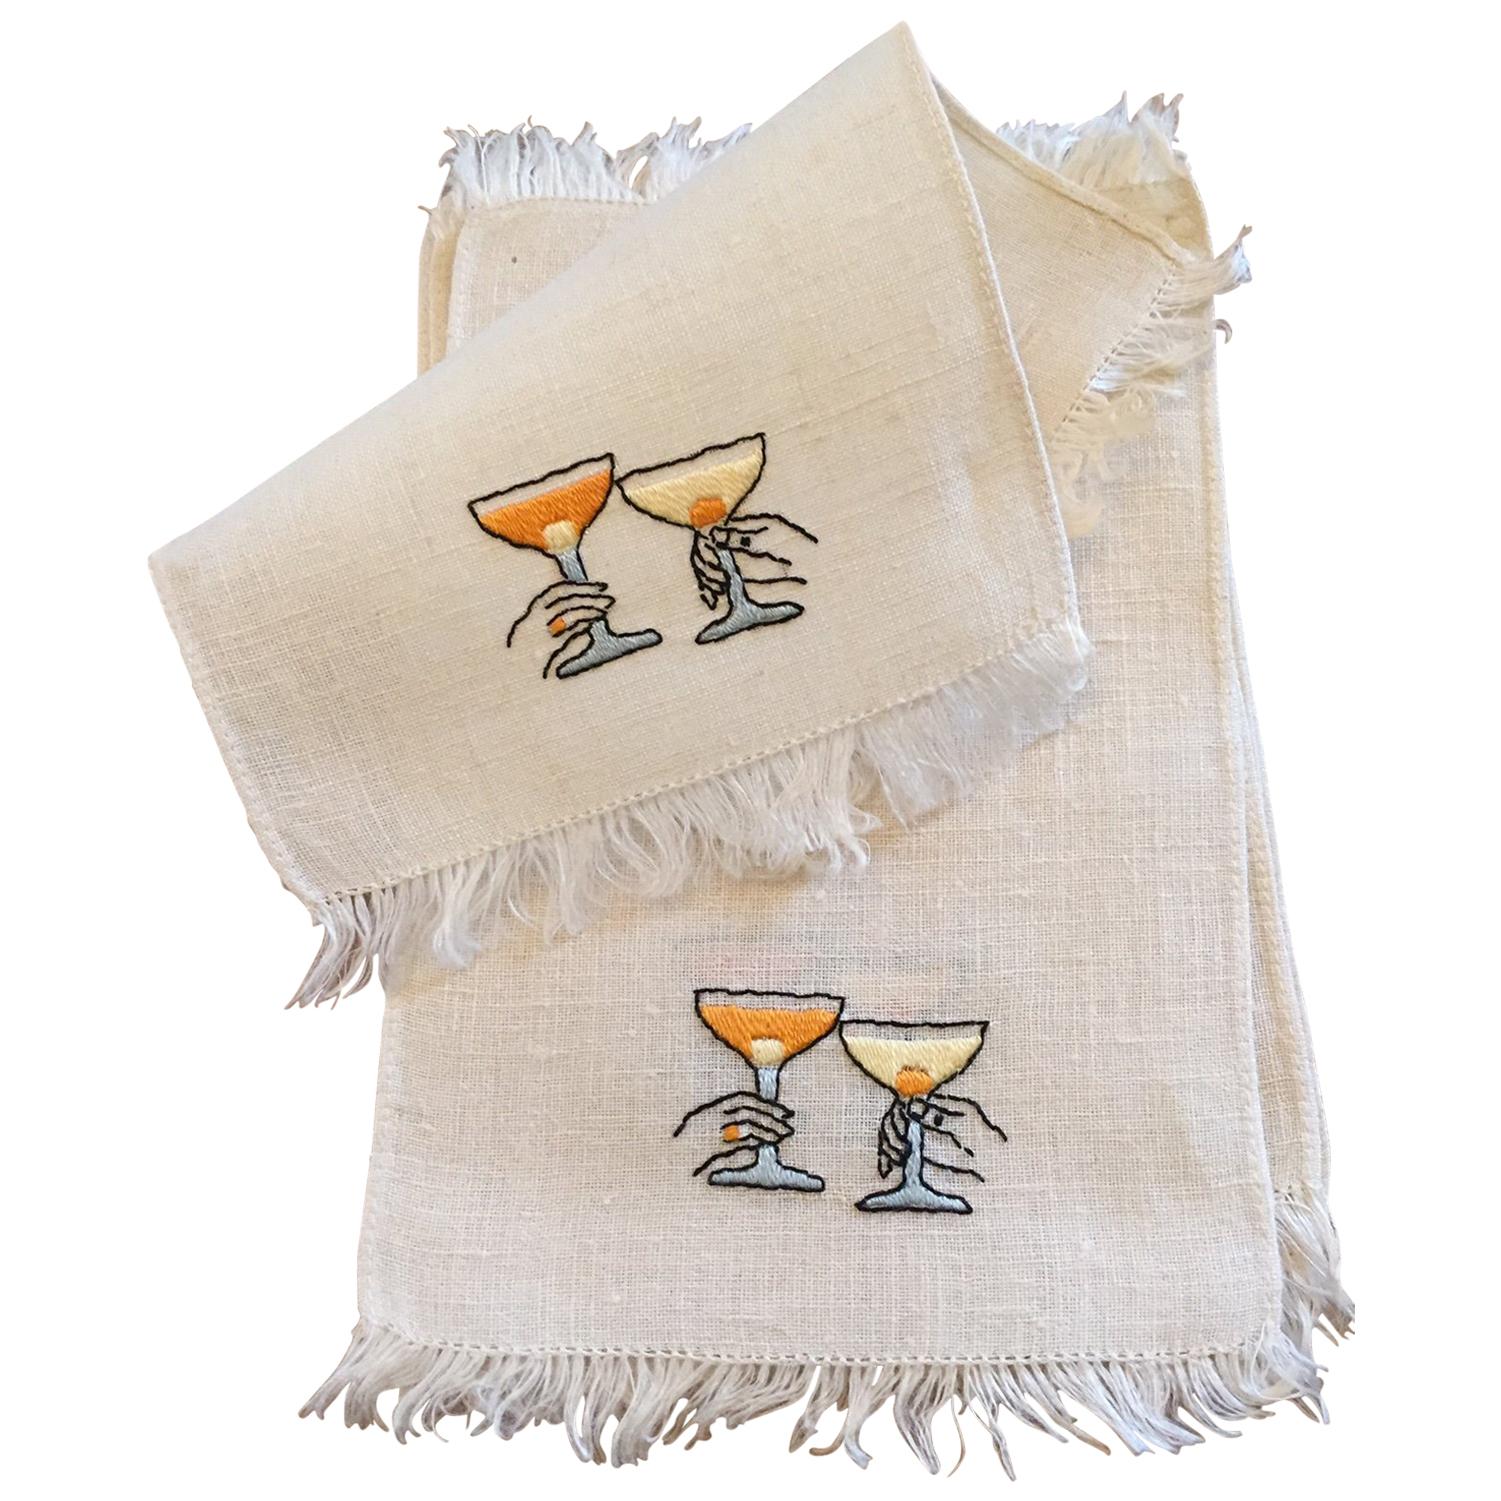 1950's Hand Embroidered Linen Cocktail Napkins  Couple Making A Toast